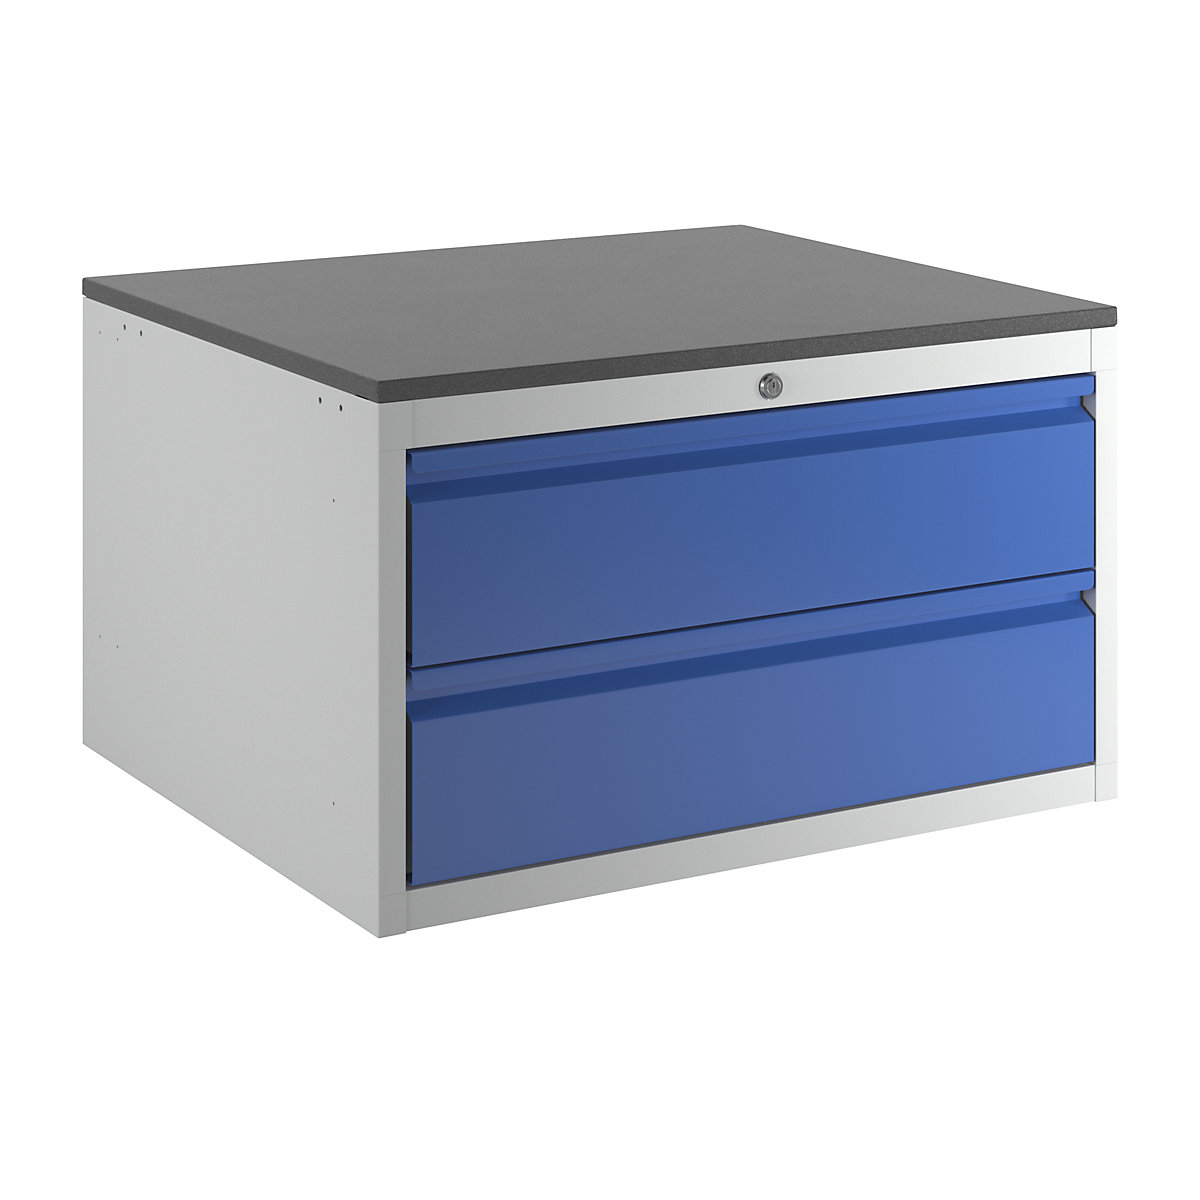 Drawer cupboard with telescopic guides – RAU, height 460 mm, 2 x 180 mm drawers, light grey / gentian blue, width 770 mm-14